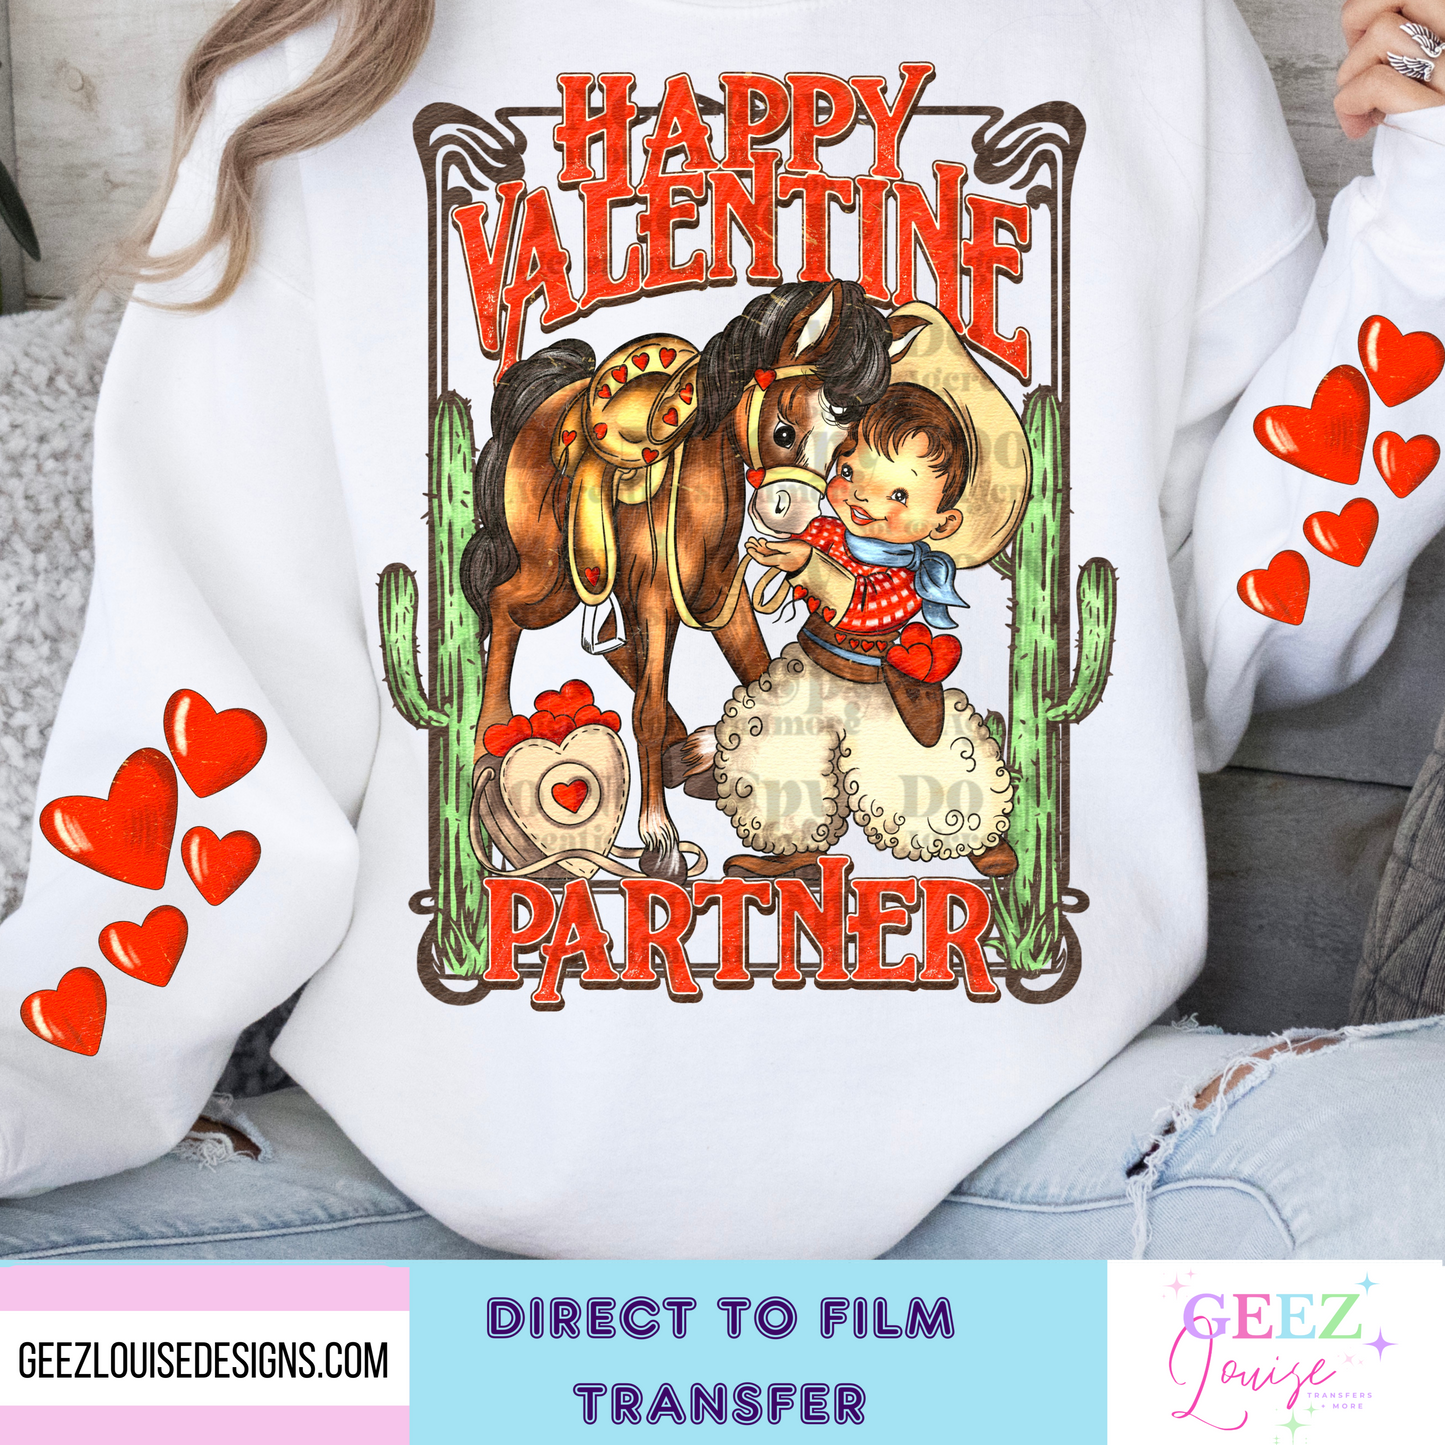 Cowboy valentine - Direct to Film Transfer - made to order